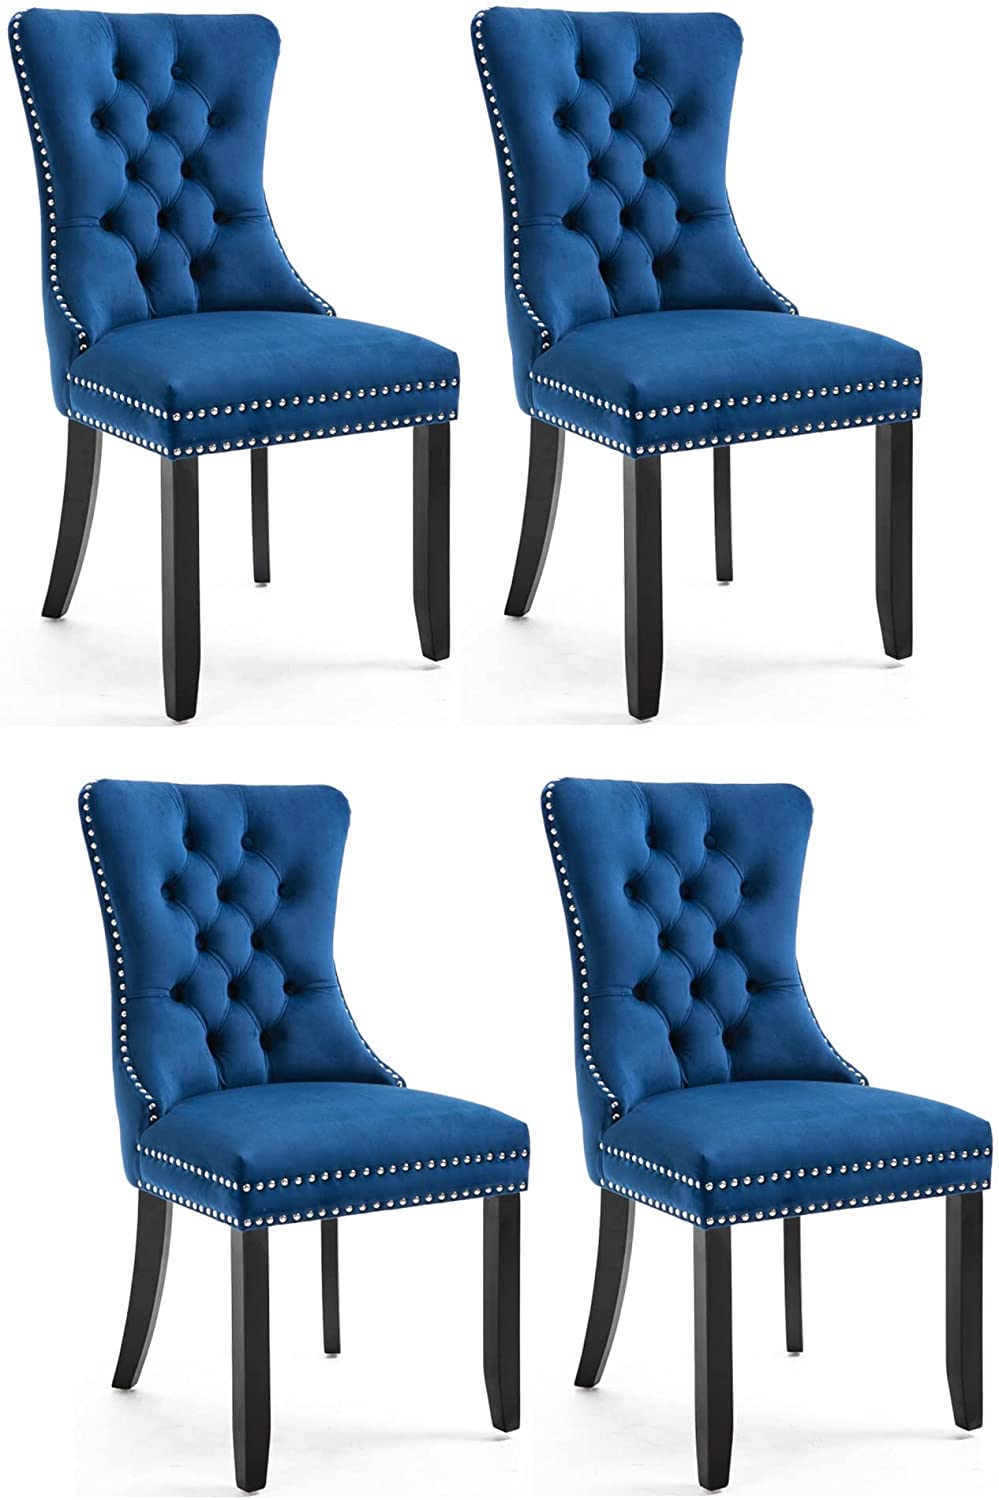 BTExpert High Back Velvet Navy Tufted Upholstered Dining Chairs, Set of 4, Solid Wood - Nail Trim, Ring